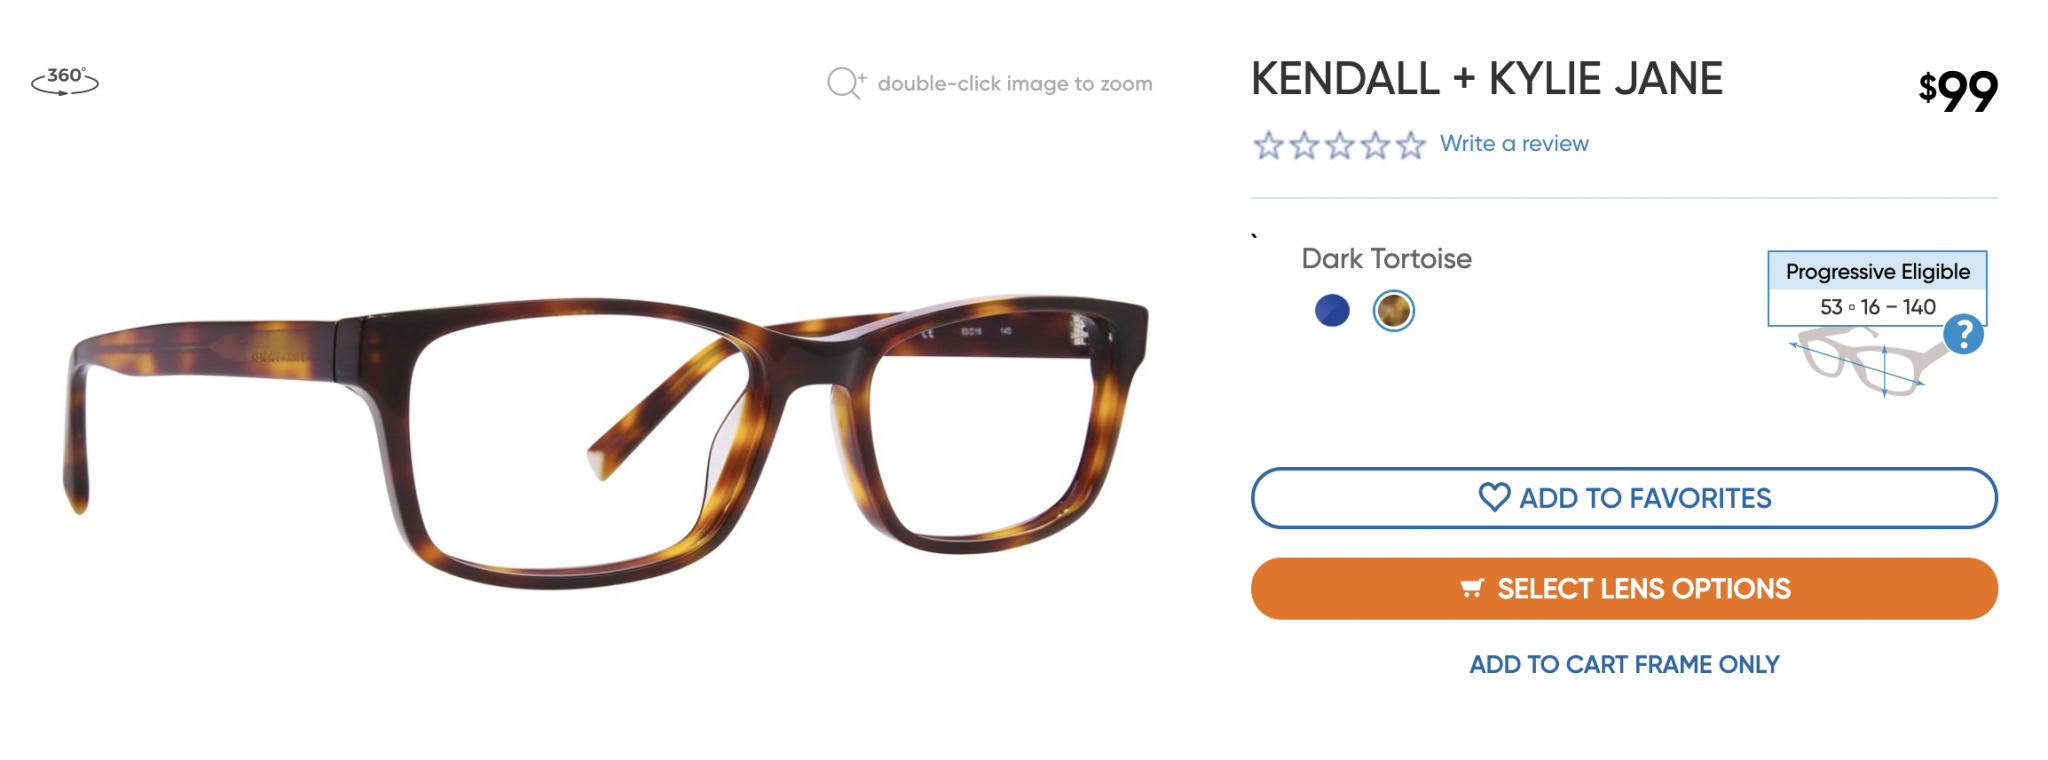 Discountglasses.com Makes Getting Glasses (and Contacts) Easier - The ...